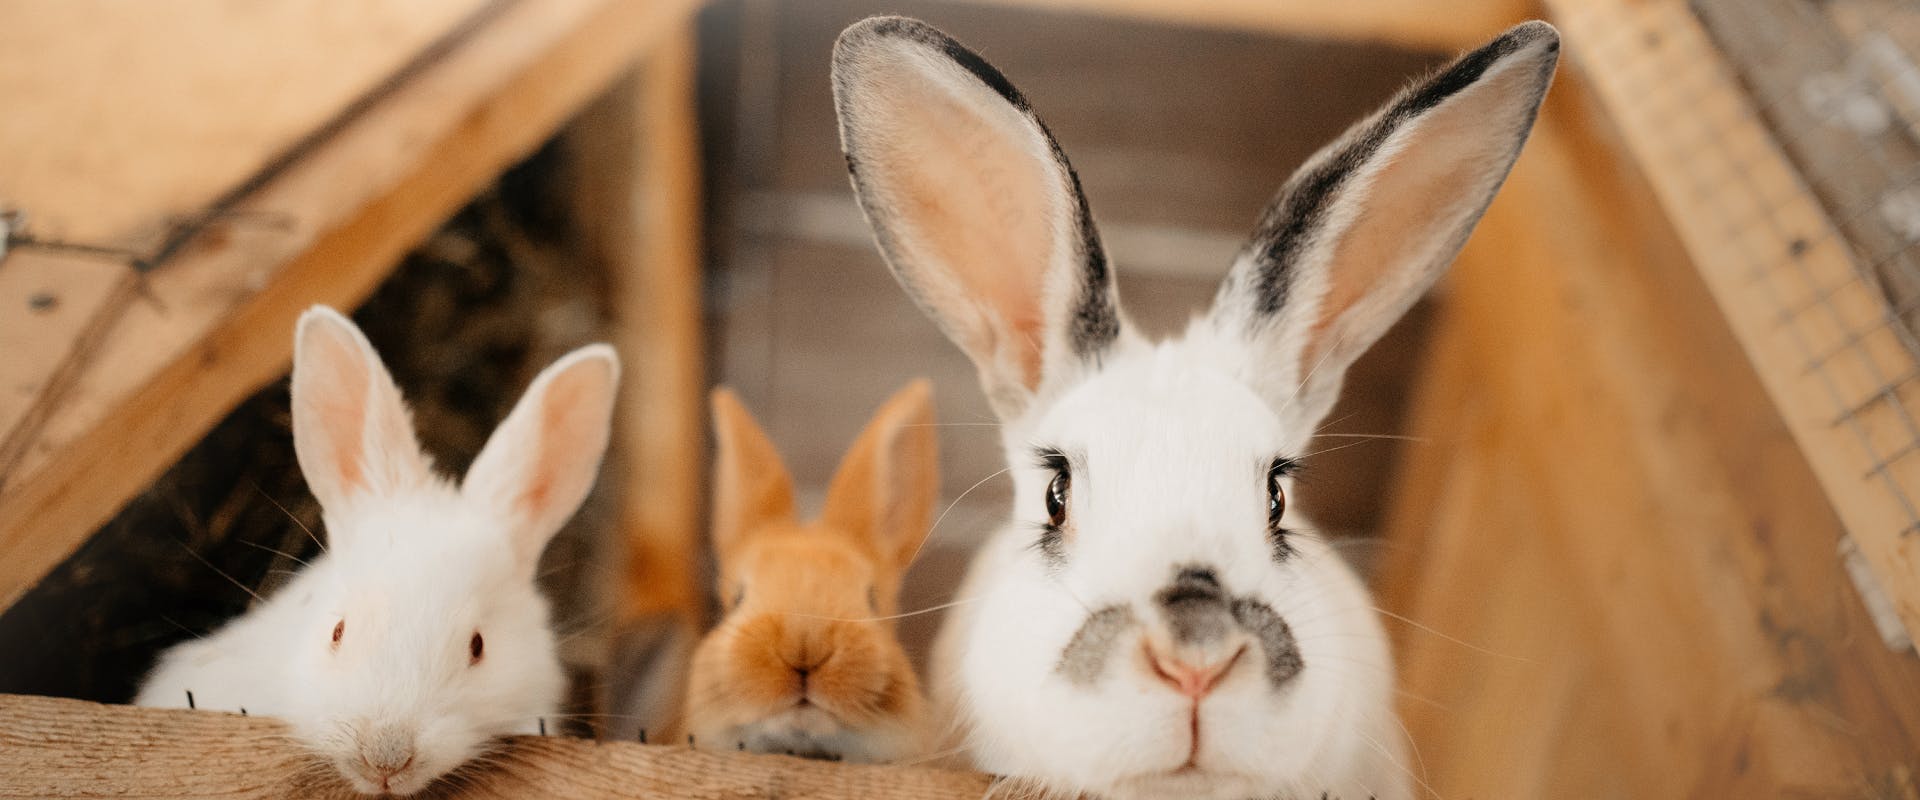 three rabbits looking down at the camera while poking their heads out of a wooden hutch